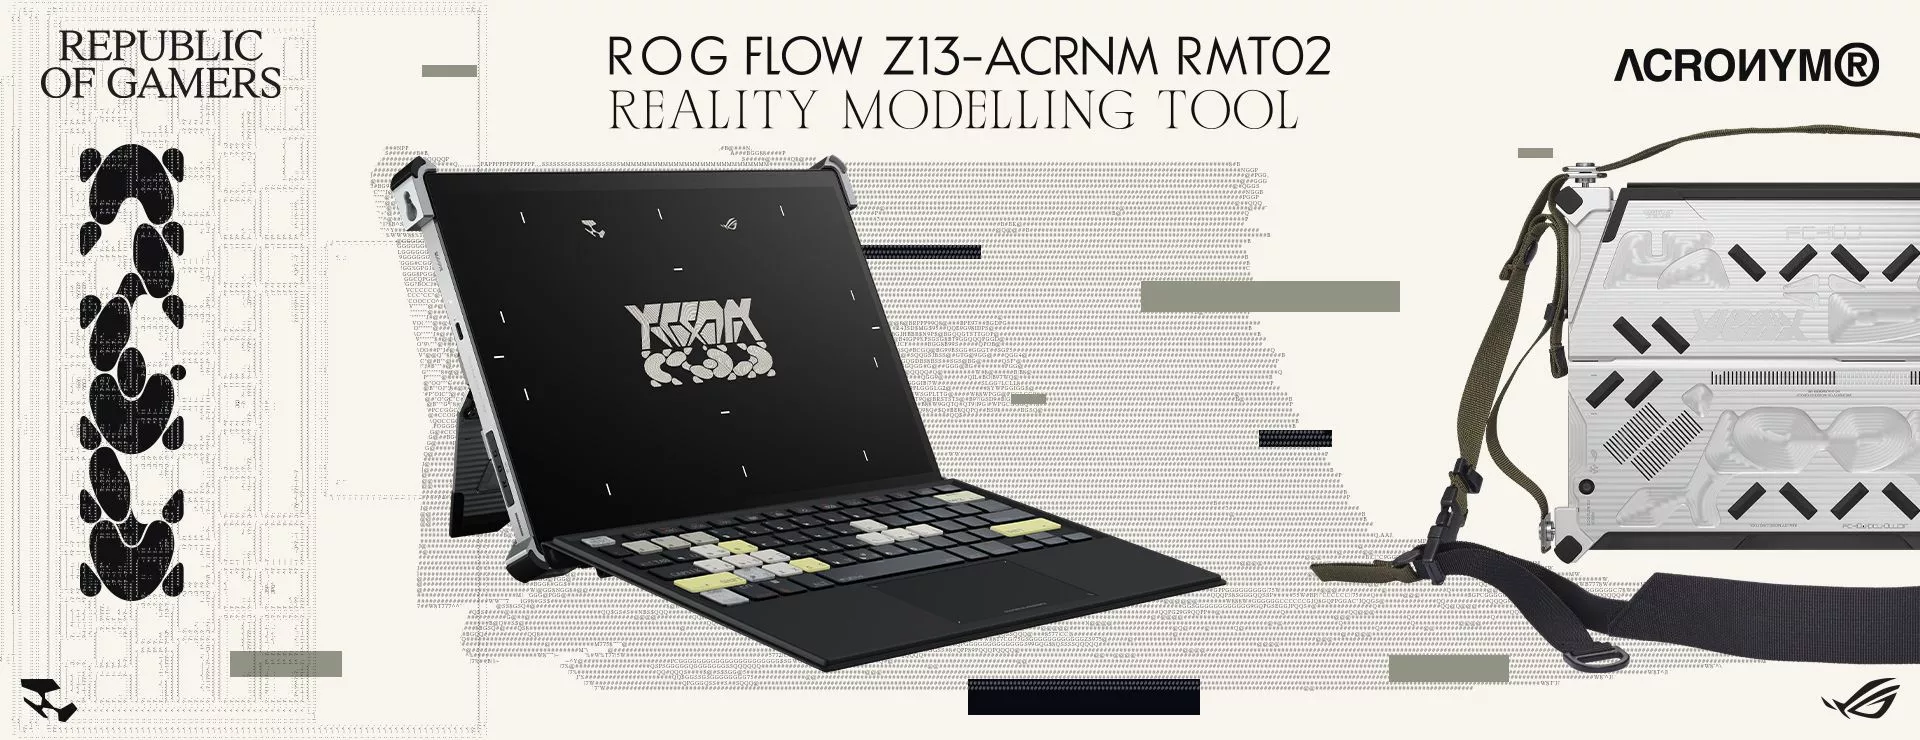 ROG Flow Z13 - ACRNM RMT02 Reality Modelling Tool